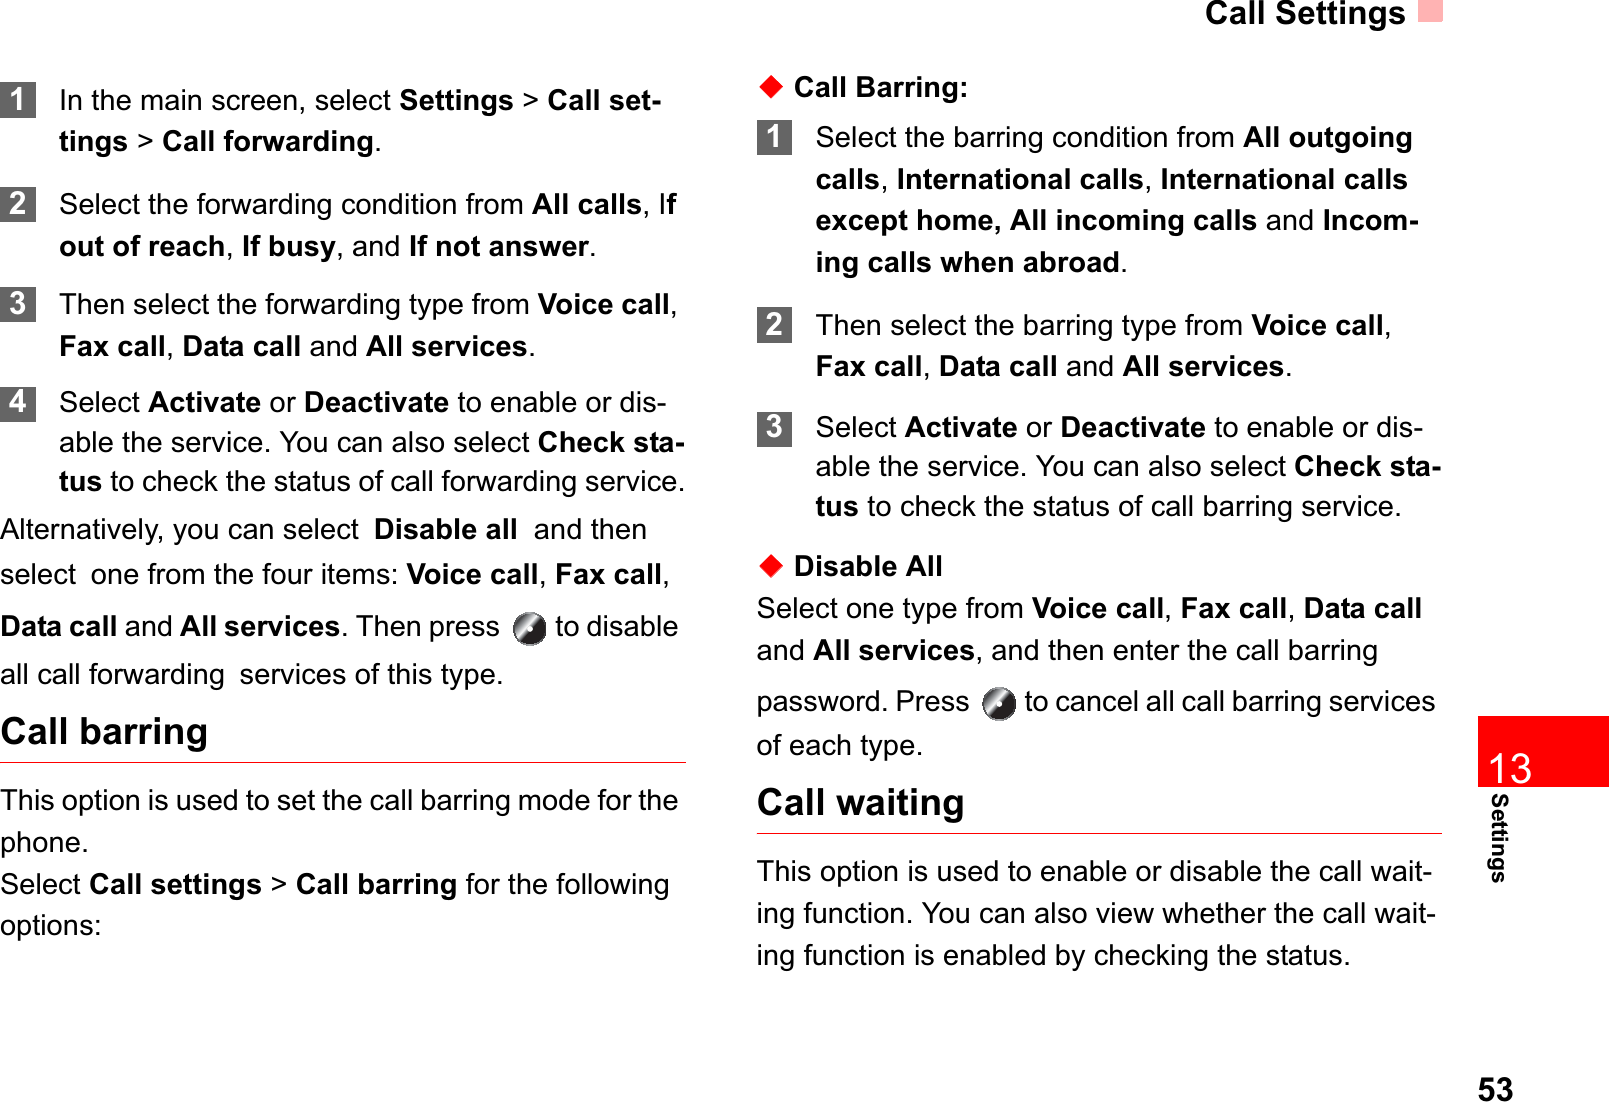 Call Settings53Settings131In the main screen, select Settings &gt;Call set-tings &gt; Call forwarding.2Select the forwarding condition from All calls, Ifout of reach,If busy, and If not answer.3Then select the forwarding type from Voice call,Fax call,Data call and All services.4Select Activate or Deactivate to enable or dis-able the service. You can also select Check sta-tus to check the status of call forwarding service.Alternatively, you can selectDisable all  and then selectone from the four items: Voice call,Fax call,Data call and All services. Then press   to disable all call forwardingservices of this type. Call barringThis option is used to set the call barring mode for the phone.Select Call settings &gt; Call barring for the following options:ƹCall Barring:1Select the barring condition from All outgoing calls,International calls,International calls except home, All incoming calls and Incom-ing calls when abroad.2Then select the barring type from Voice call,Fax call,Data call and All services.3Select Activate or Deactivate to enable or dis-able the service. You can also select Check sta-tus to check the status of call barring service.ƹDisable AllSelect one type from Voice call,Fax call,Data calland All services, and then enter the call barring password. Press   to cancel all call barring services of each type.Call waitingThis option is used to enable or disable the call wait-ing function. You can also view whether the call wait-ing function is enabled by checking the status.